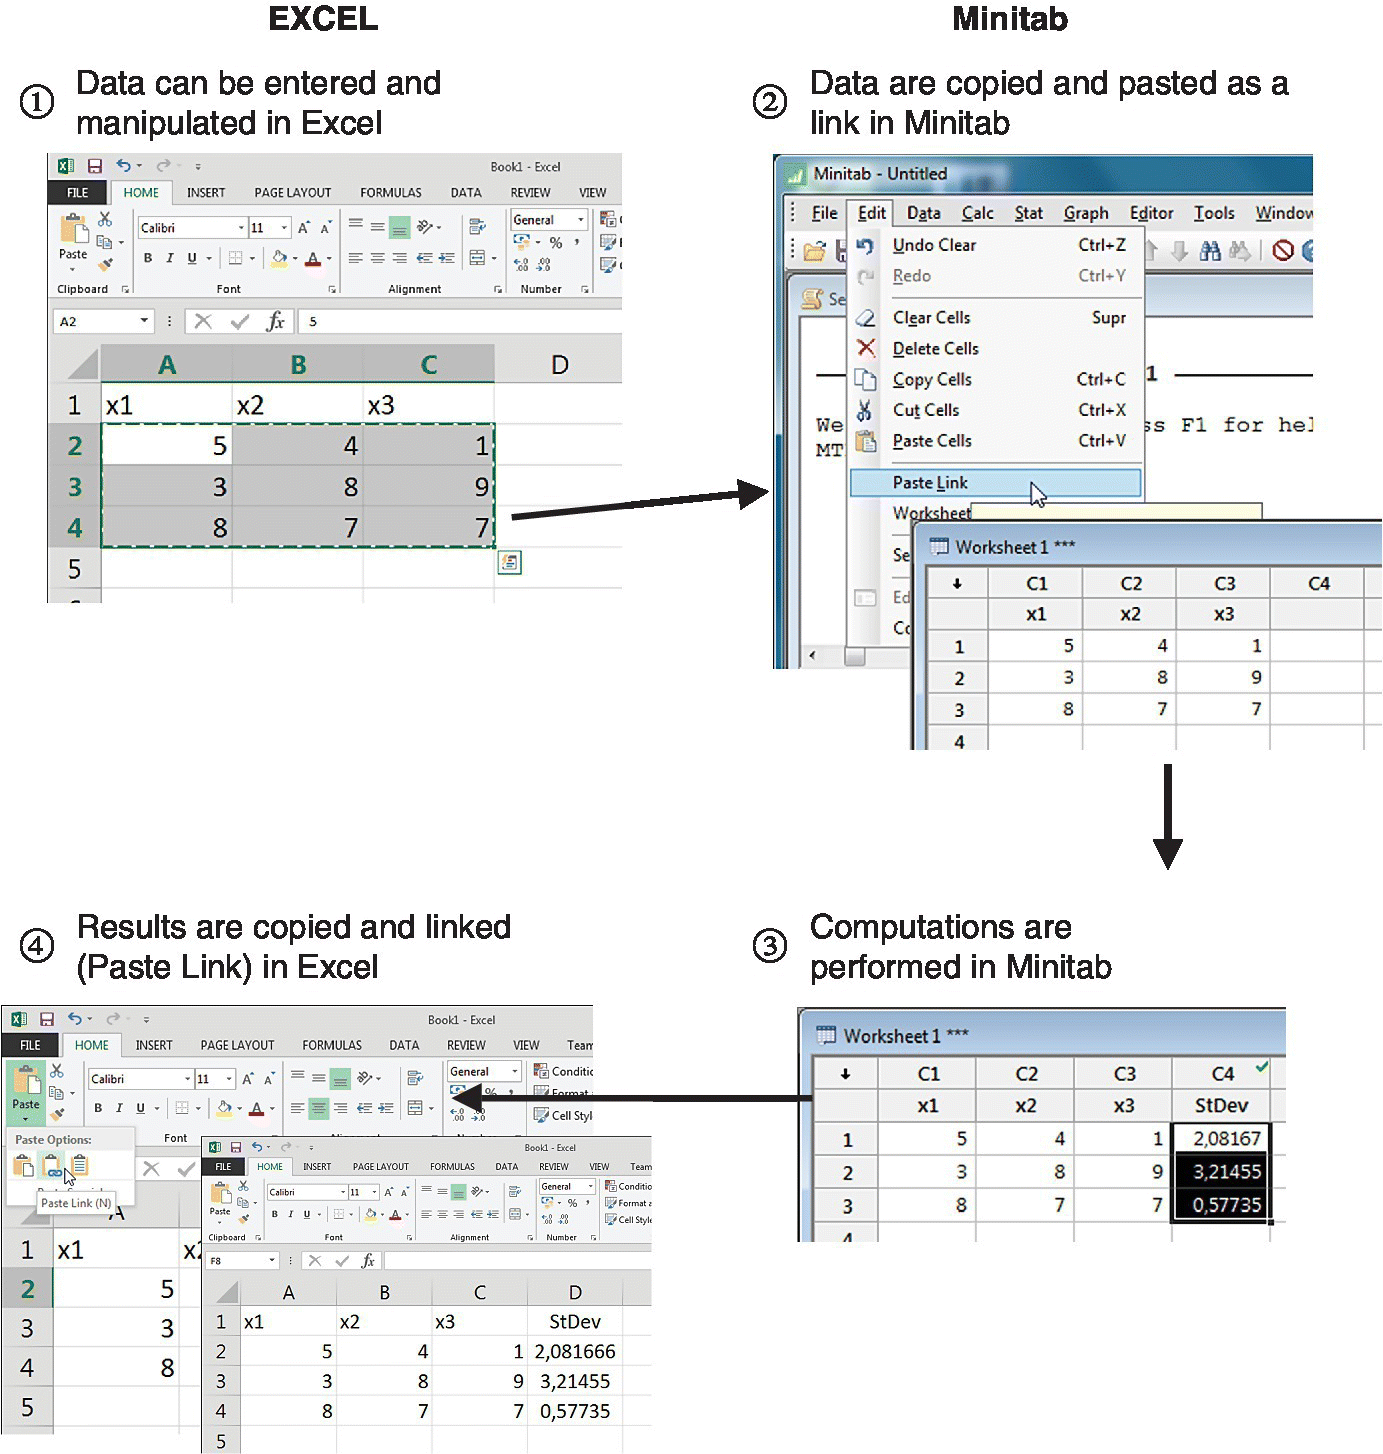 Four snipped images illustrating the DDE connection between Excel and Minitab, where data from Excel linked into Minitab, and results from Minitab also linked in Excel.